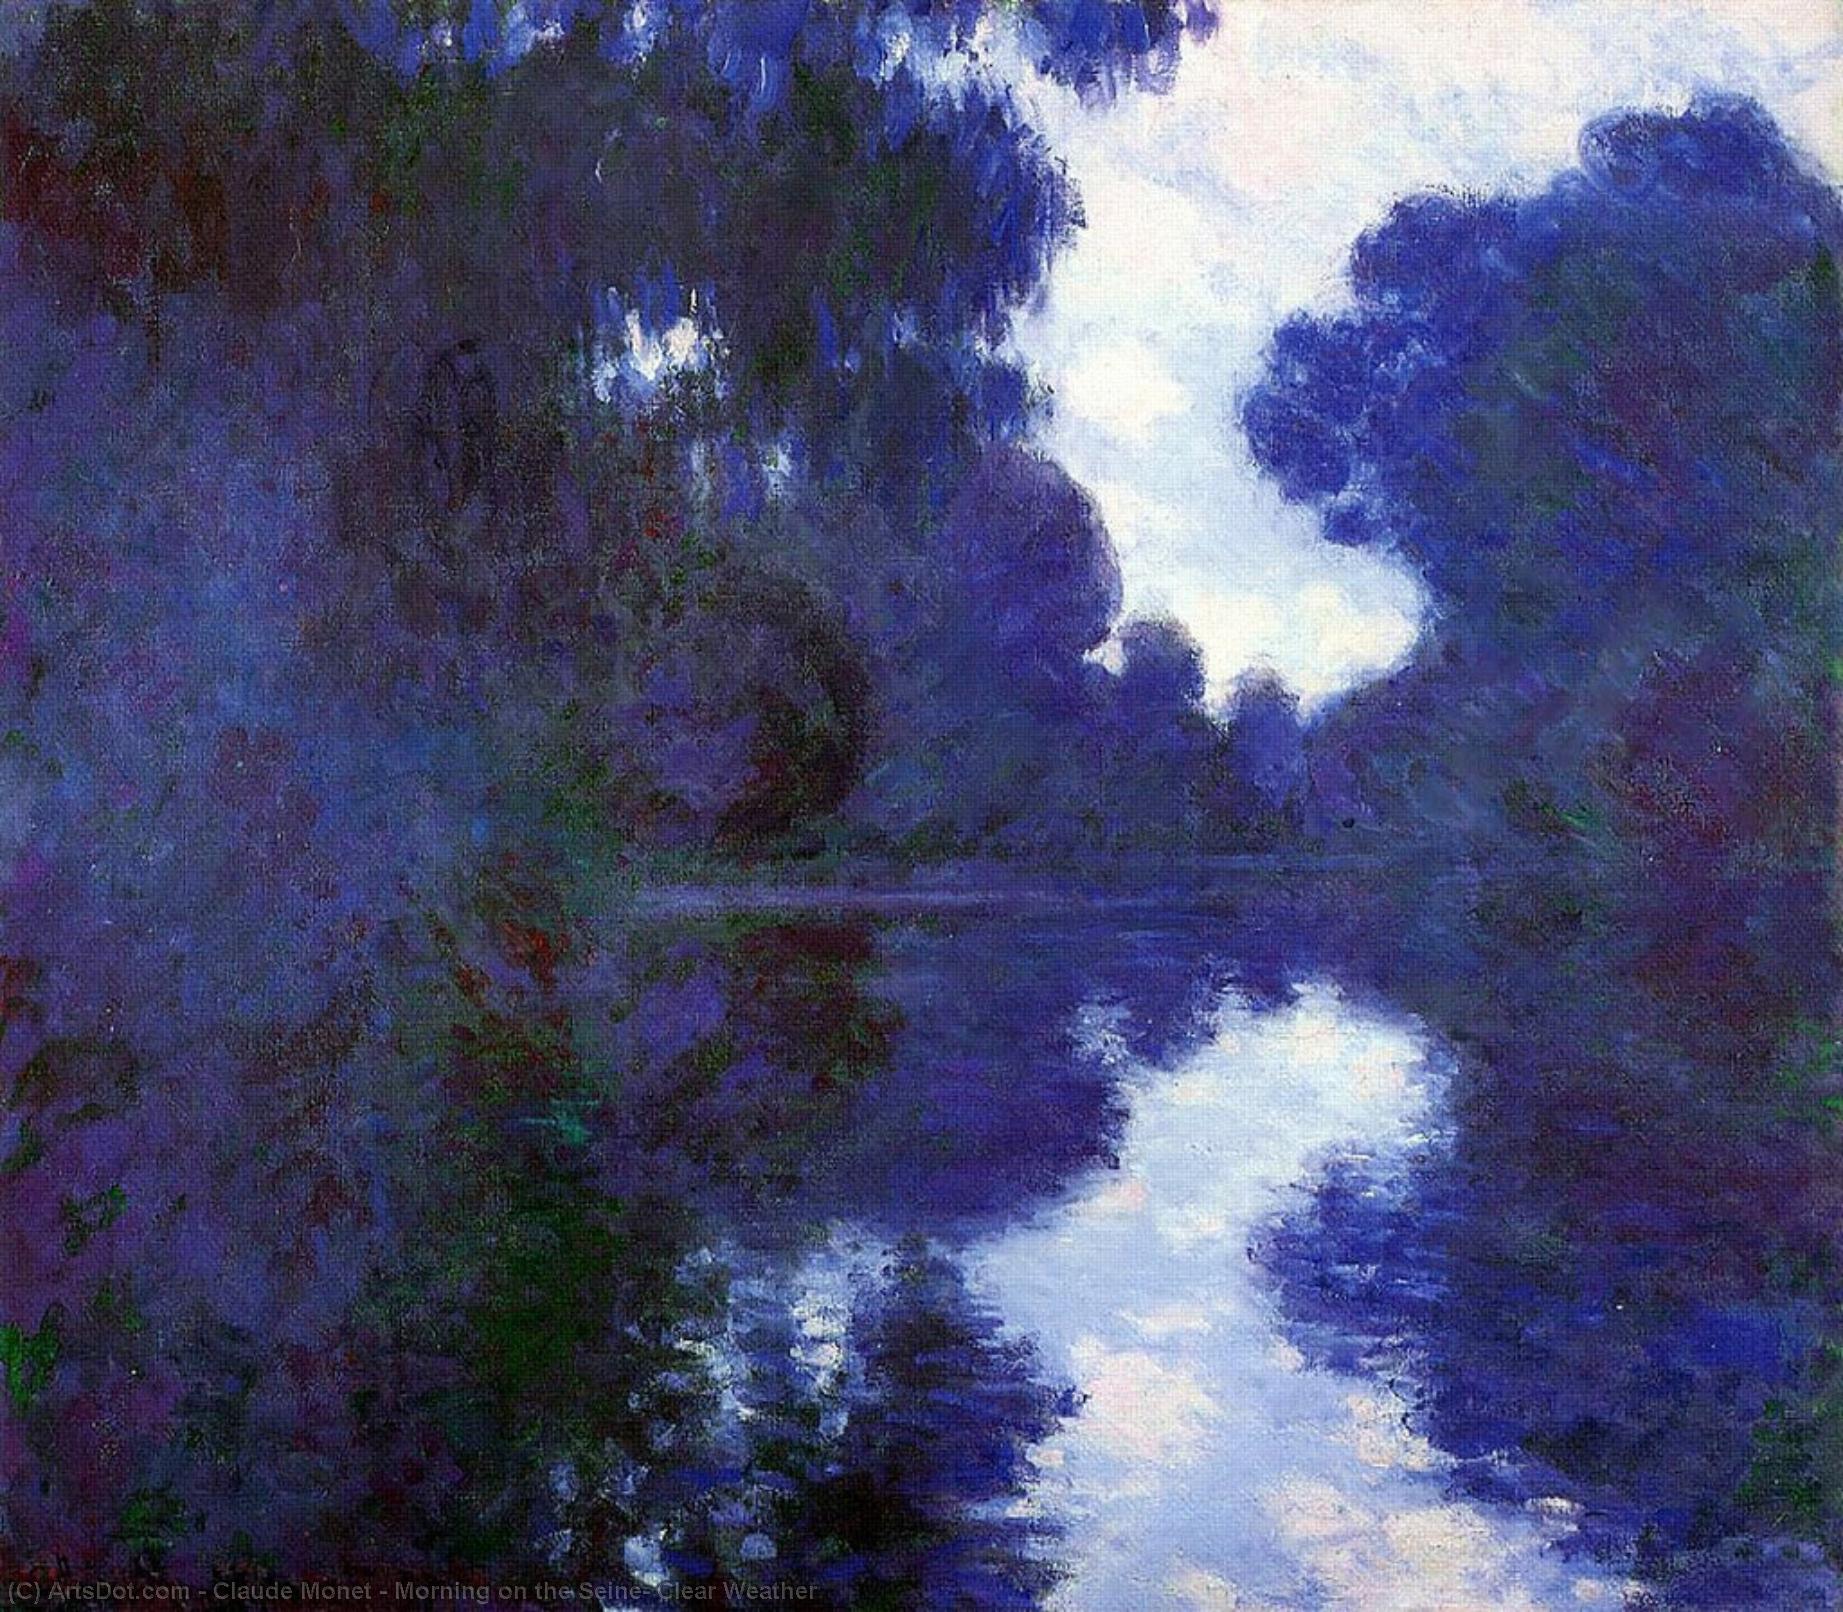 WikiOO.org - 백과 사전 - 회화, 삽화 Claude Monet - Morning on the Seine, Clear Weather